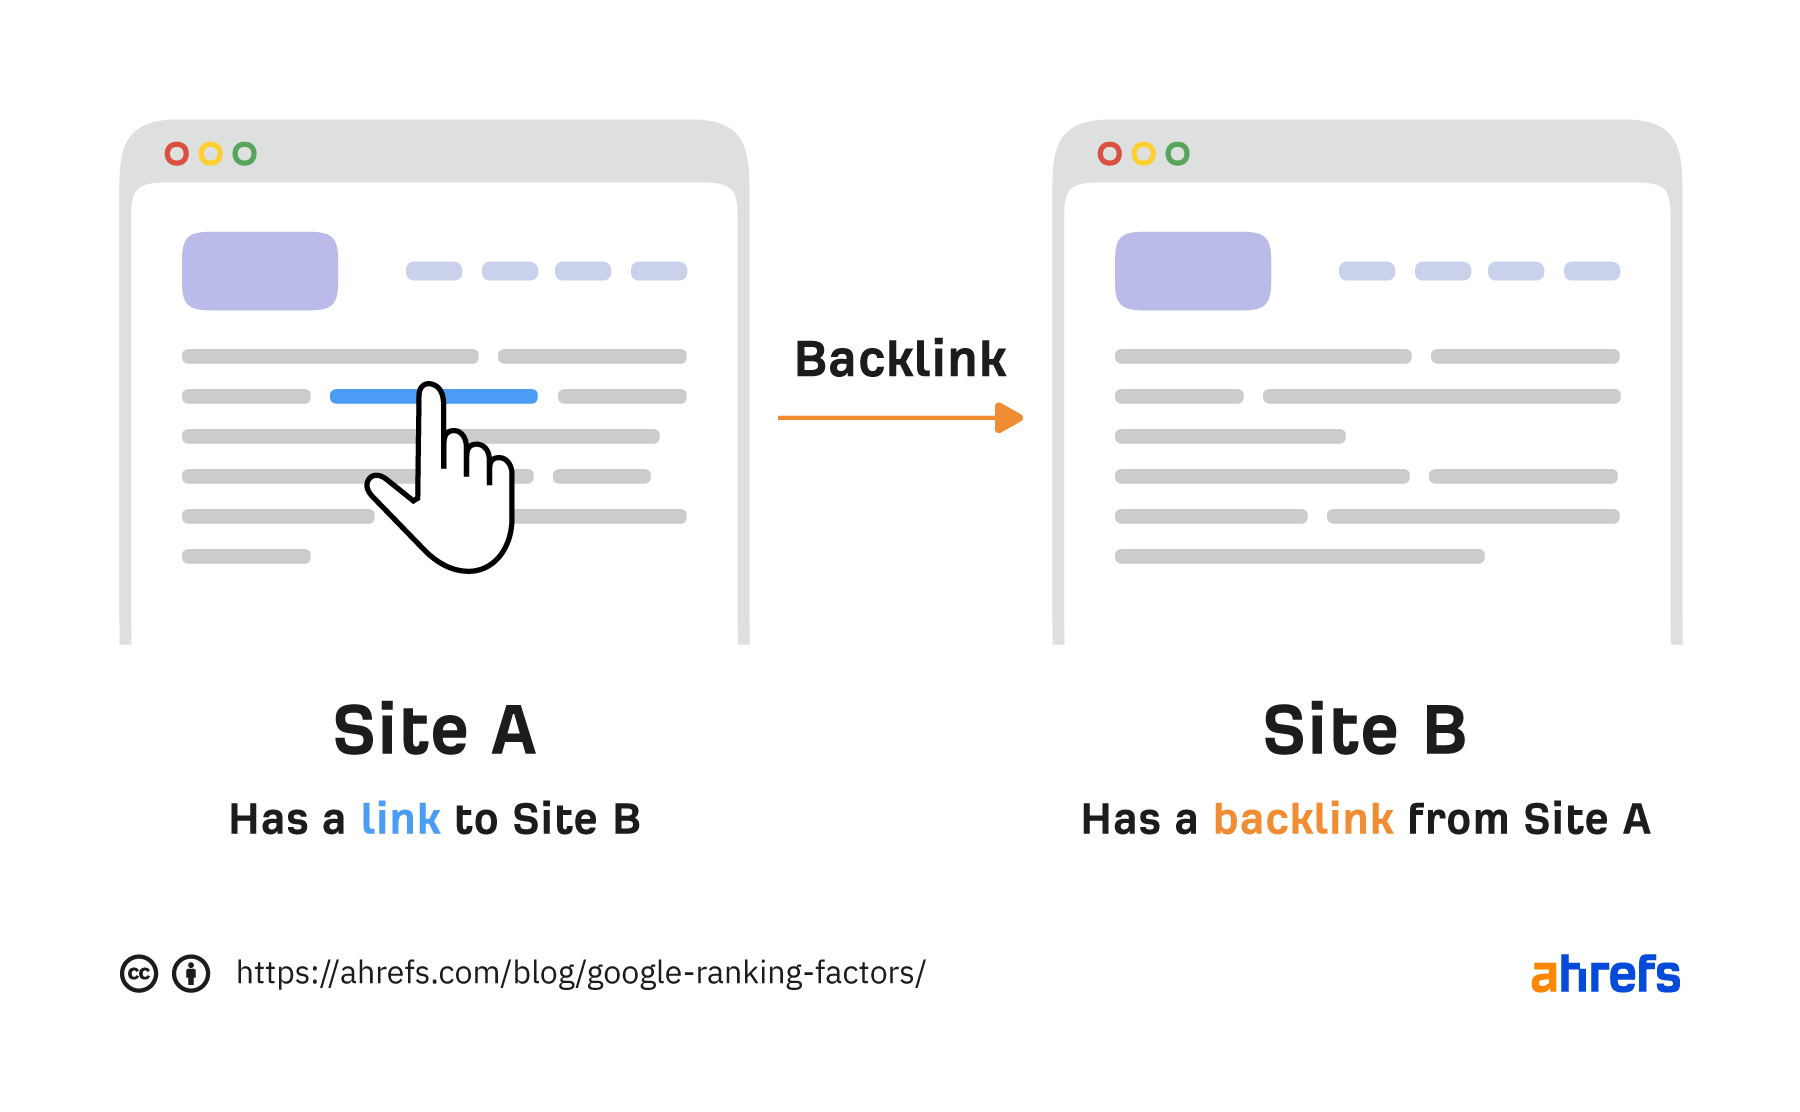 Backlinks are clickable links from one website to another